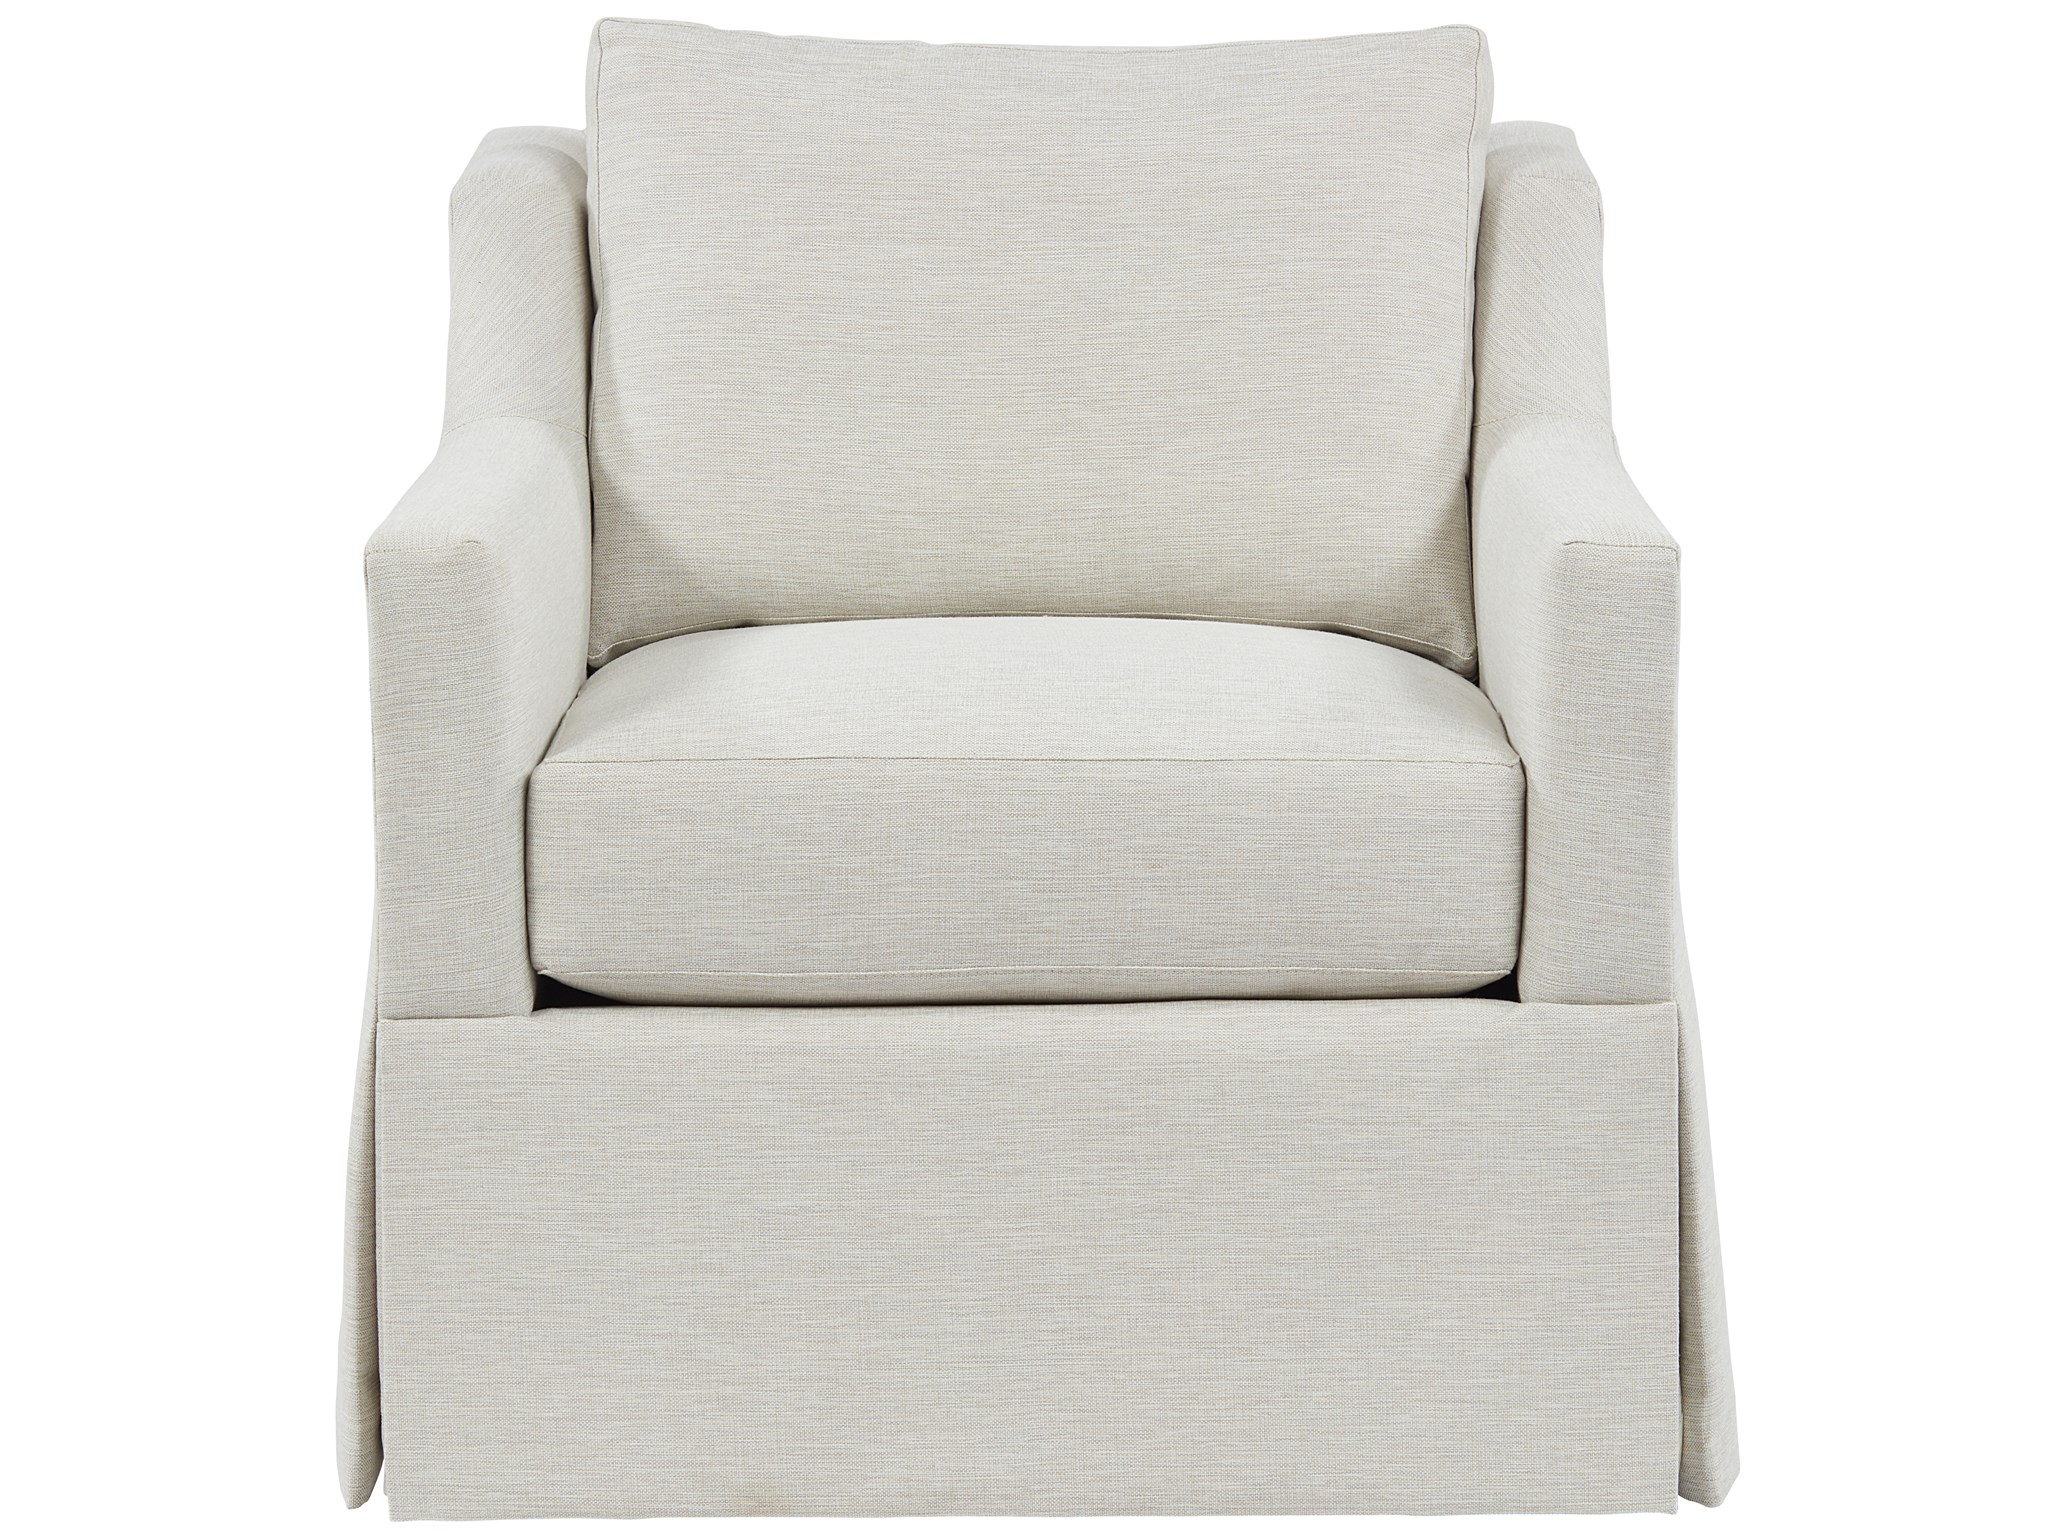 Grant Swivel Chair - Special Order